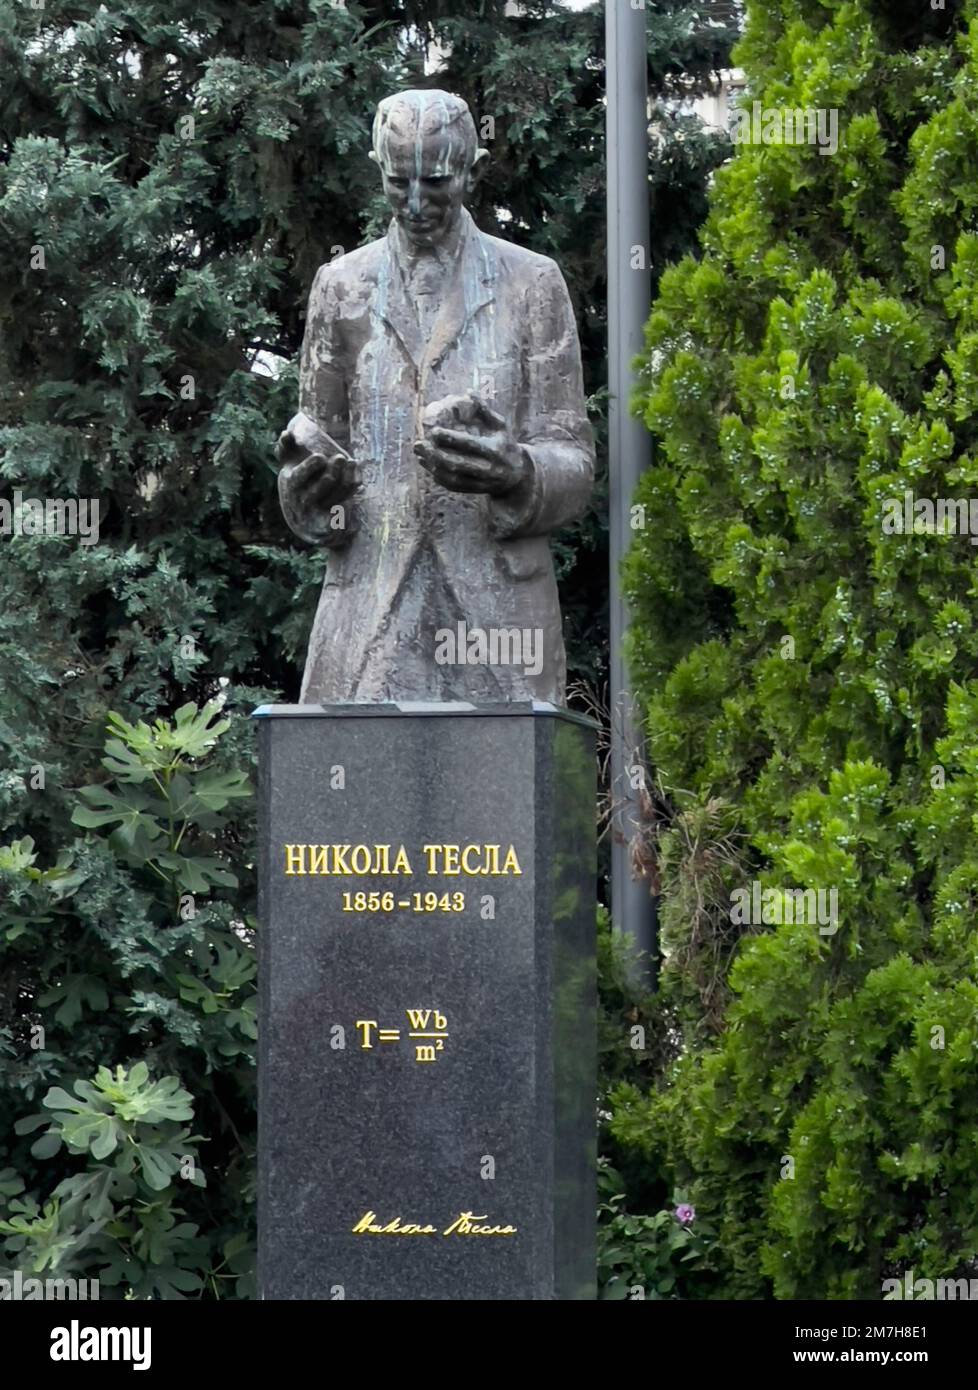 Defaced granite stone statue of Tesla in outdoor park in Belgrade, Serbia. Nicola Tesla, engineer and inventor, lived from 1856 - January 7, 1943. Stock Photo